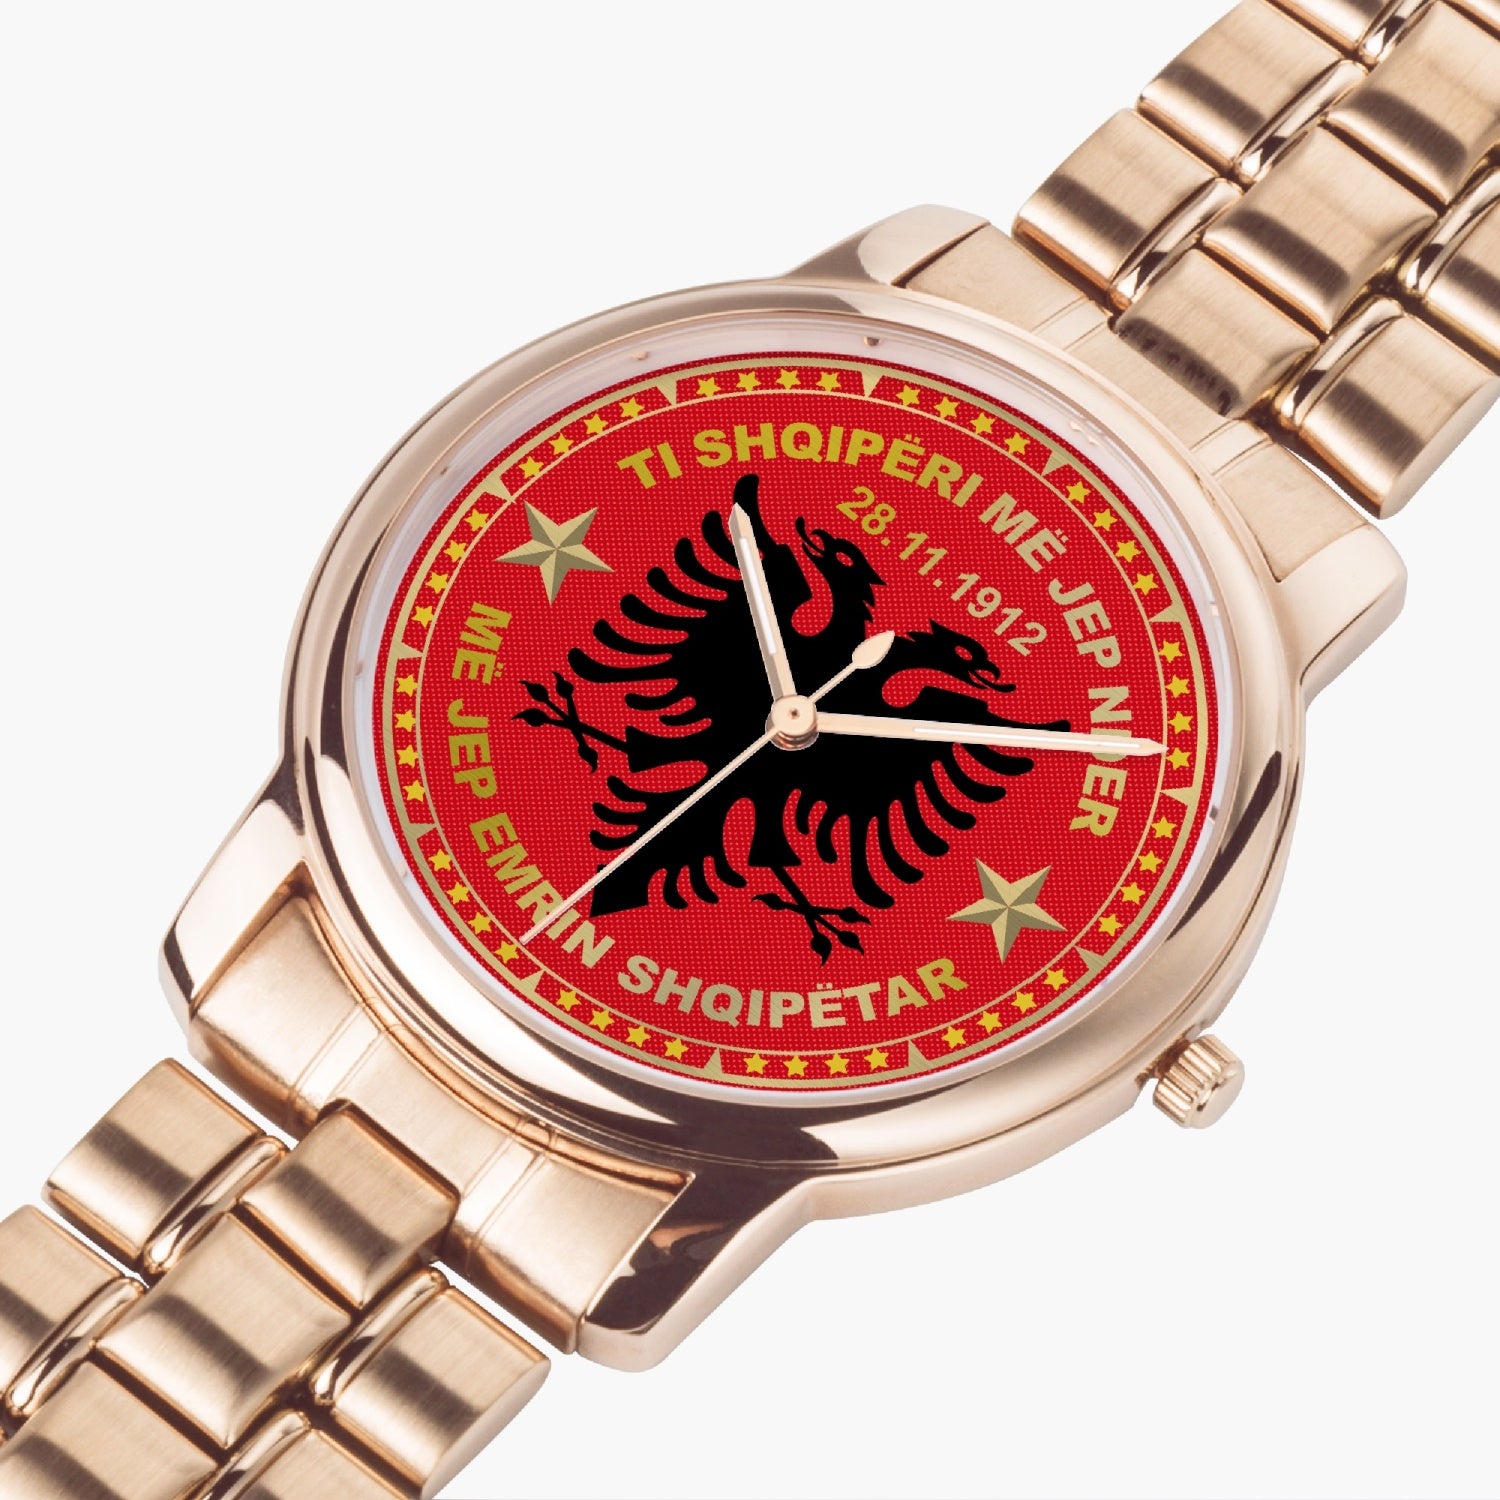 153. Albania Coat Of Arms Rose Gold Watch